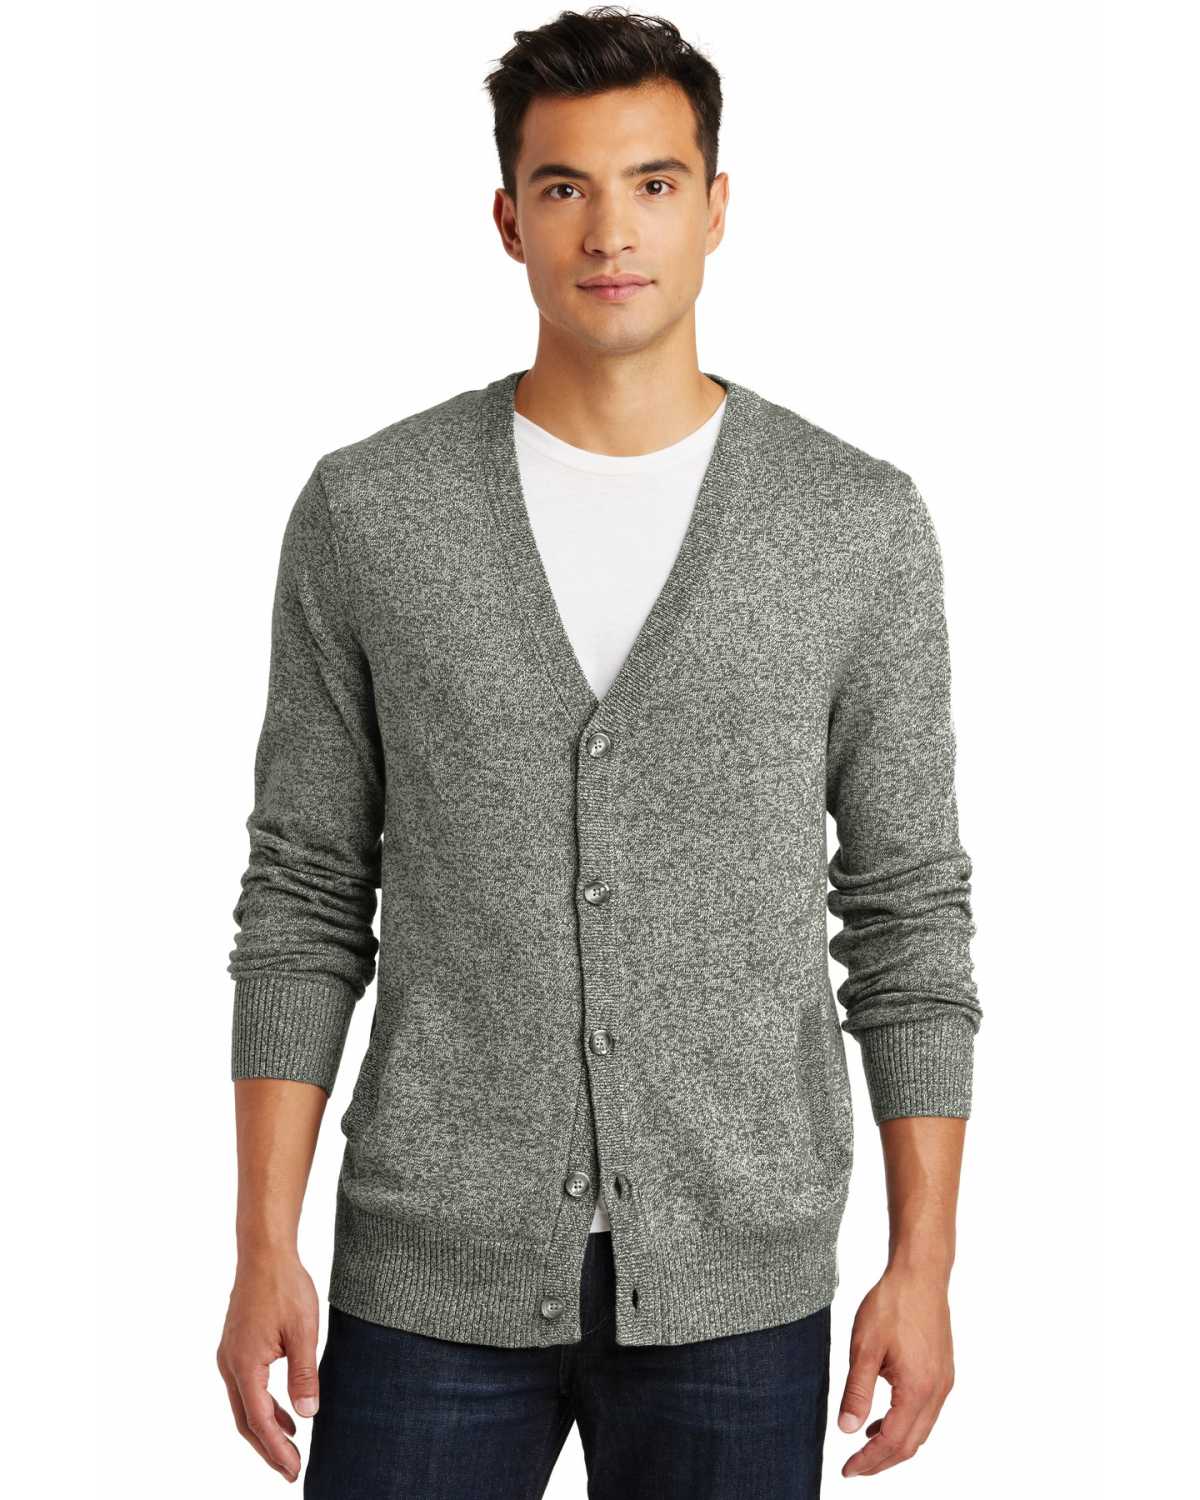 District Made Made DM315 Made Mens Cardigan Sweater on discount ...